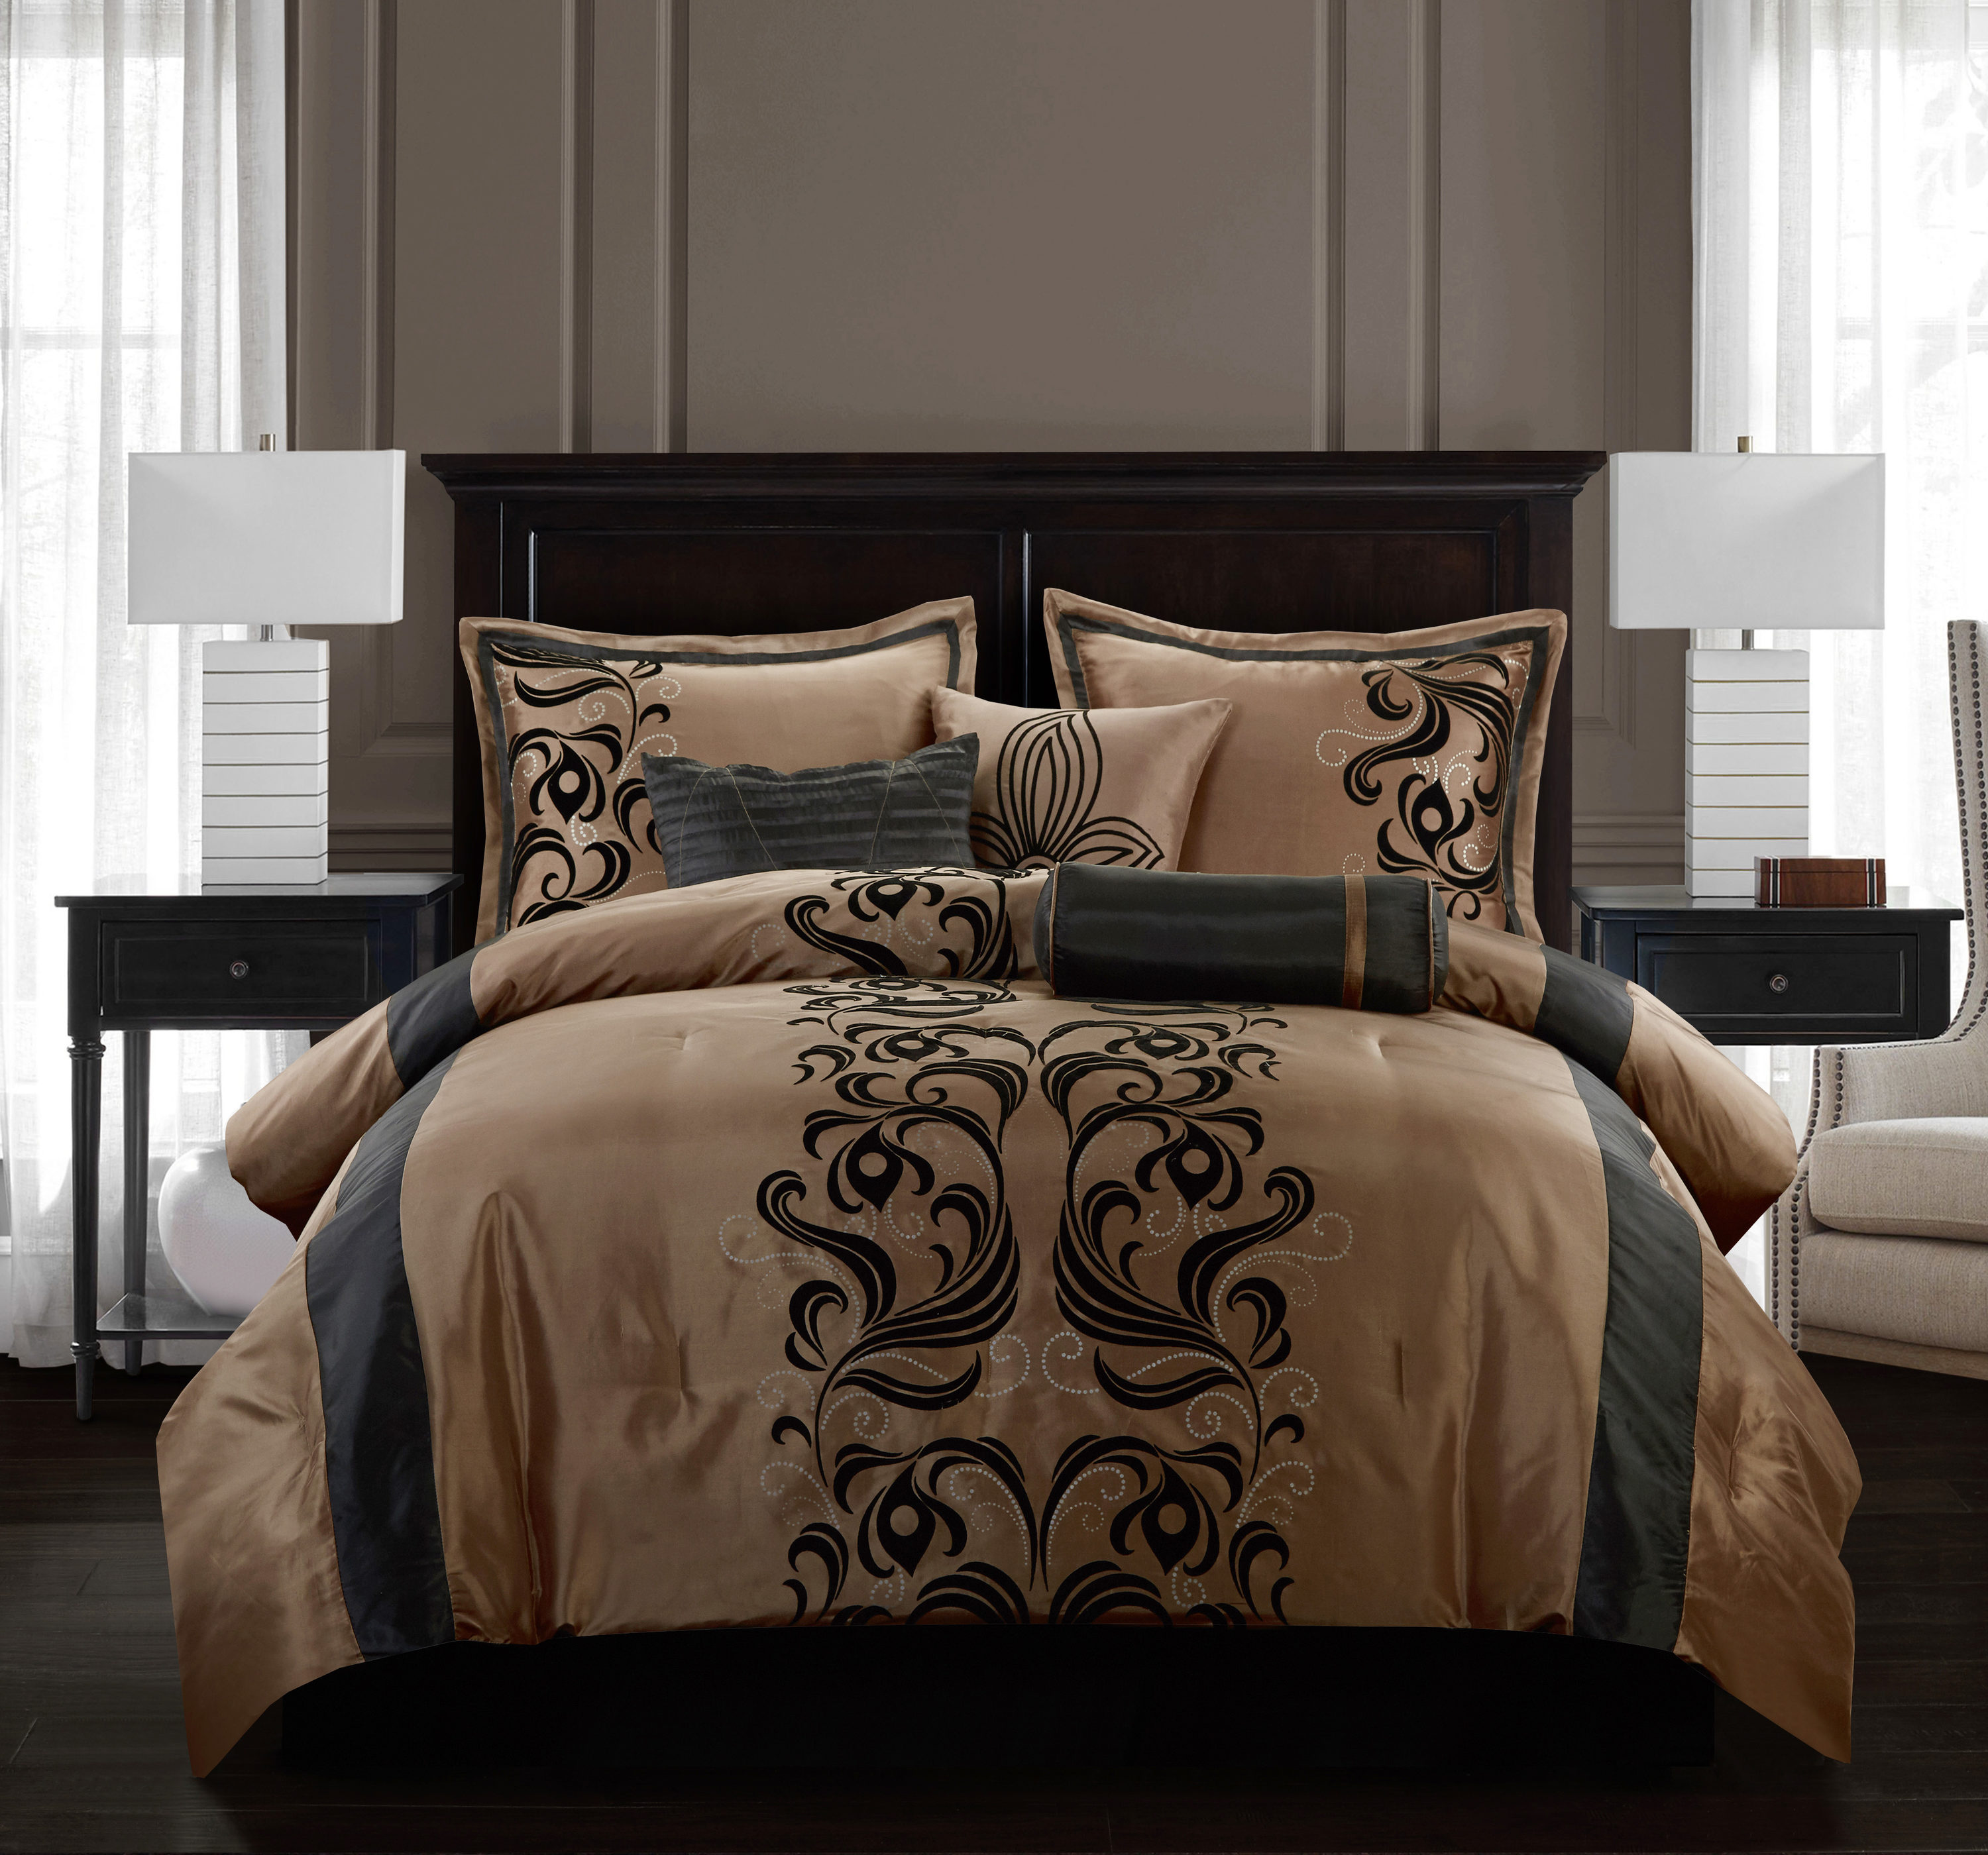 Comforter Set In King Size With Branded Design In Dark Brown Colour